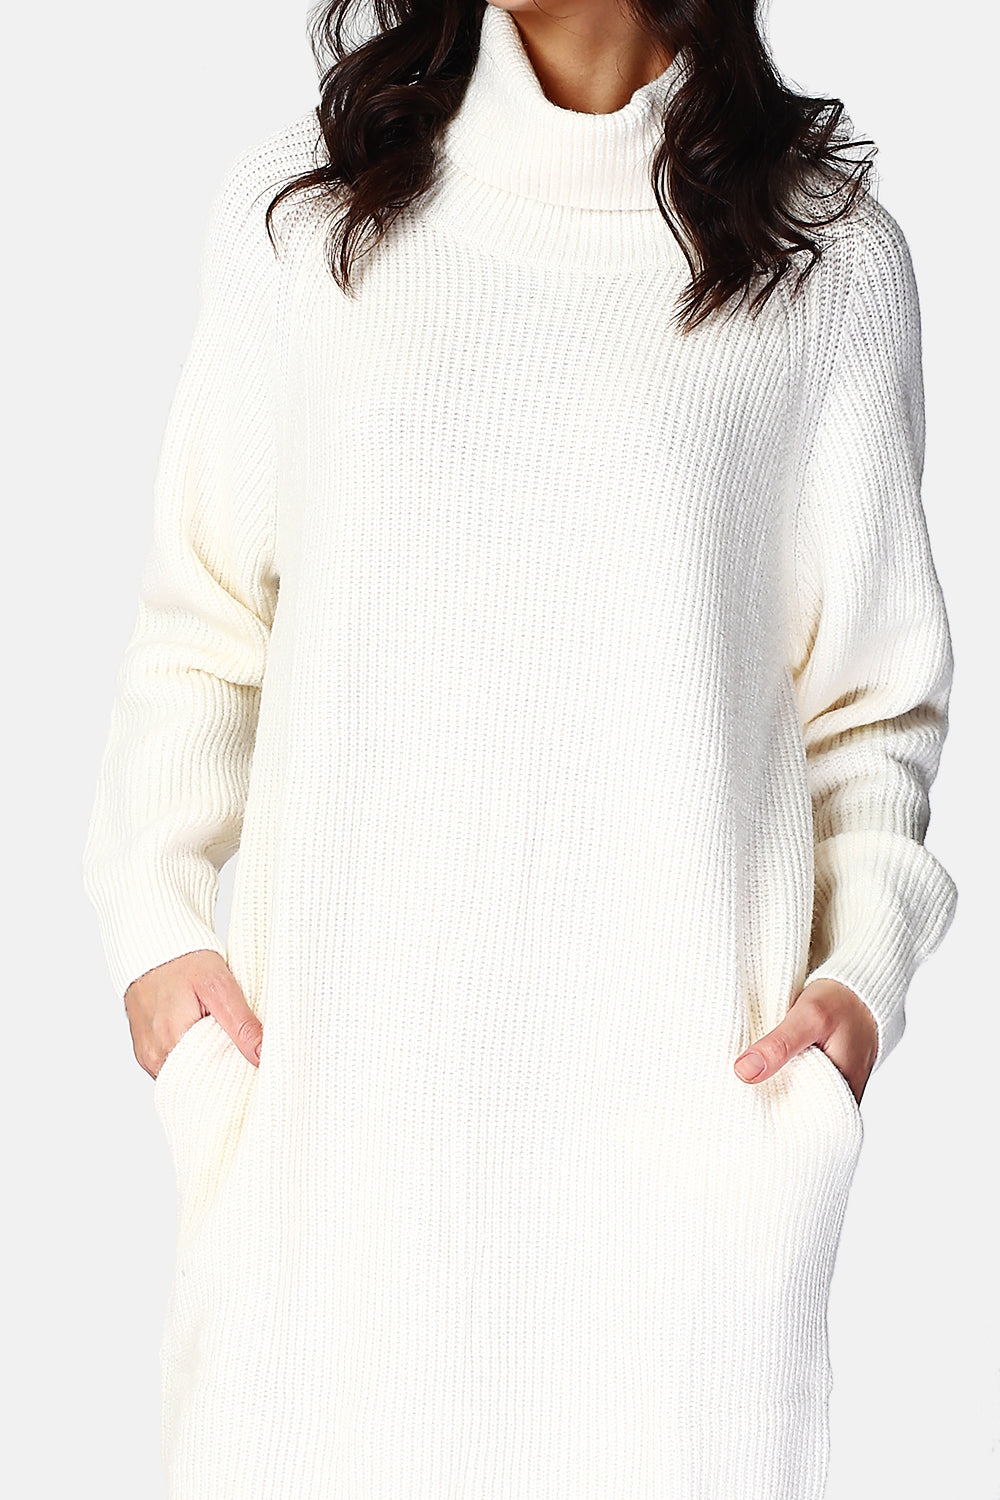 Turtleneck dress with pockets on 2 sides with long sleeves in English rib